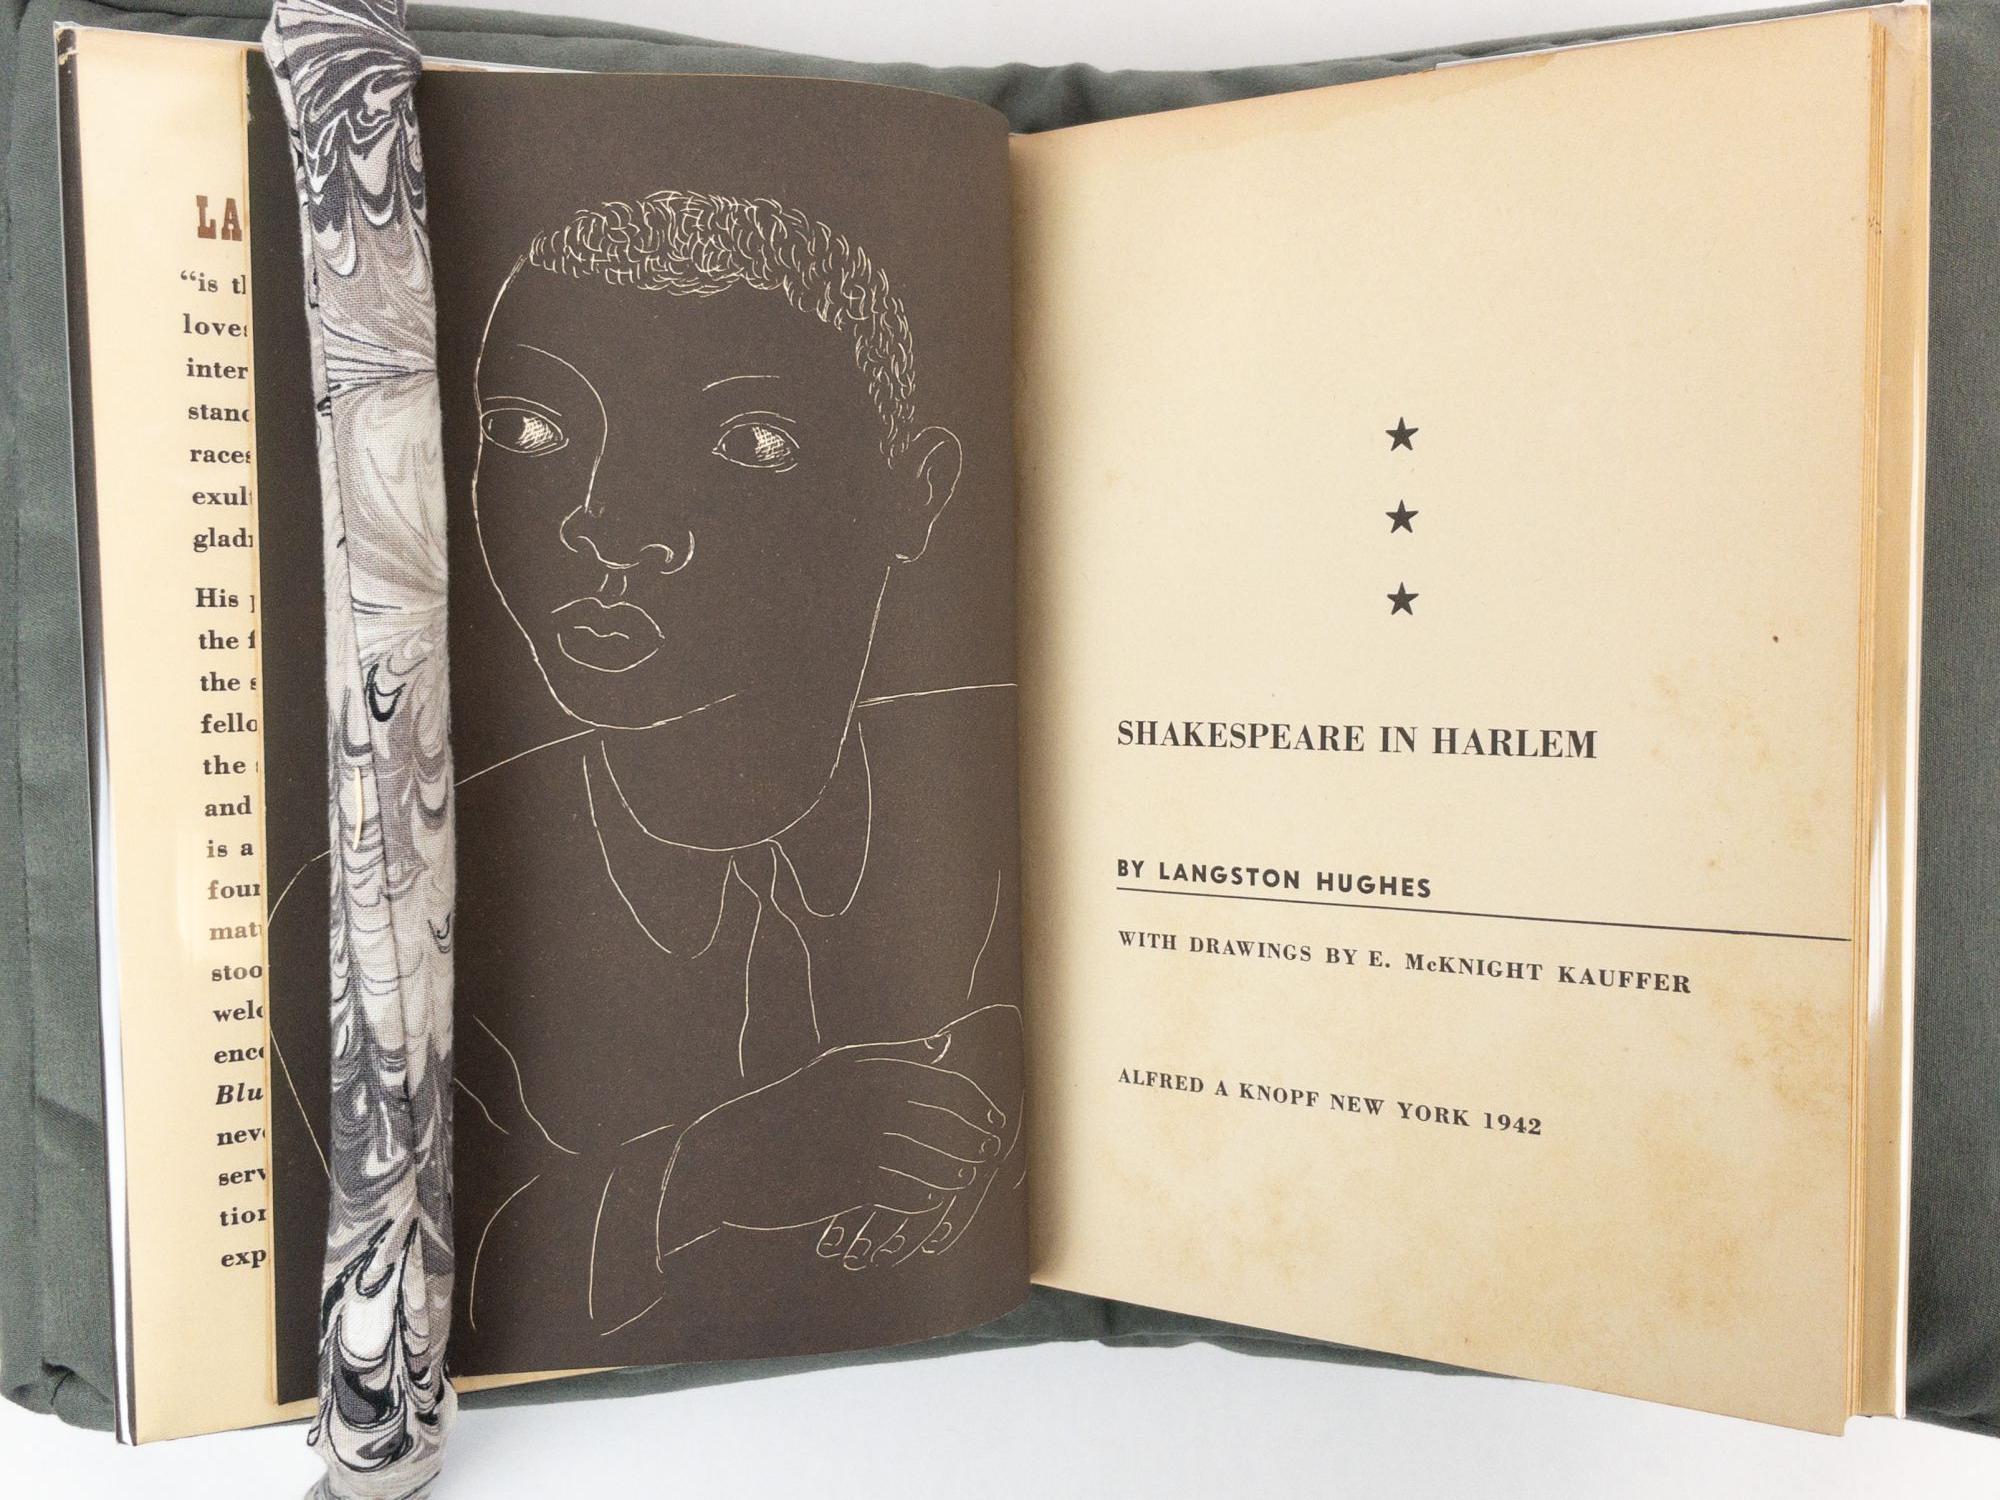 Product Image for SHAKESPEARE IN HARLEM [SIGNED]